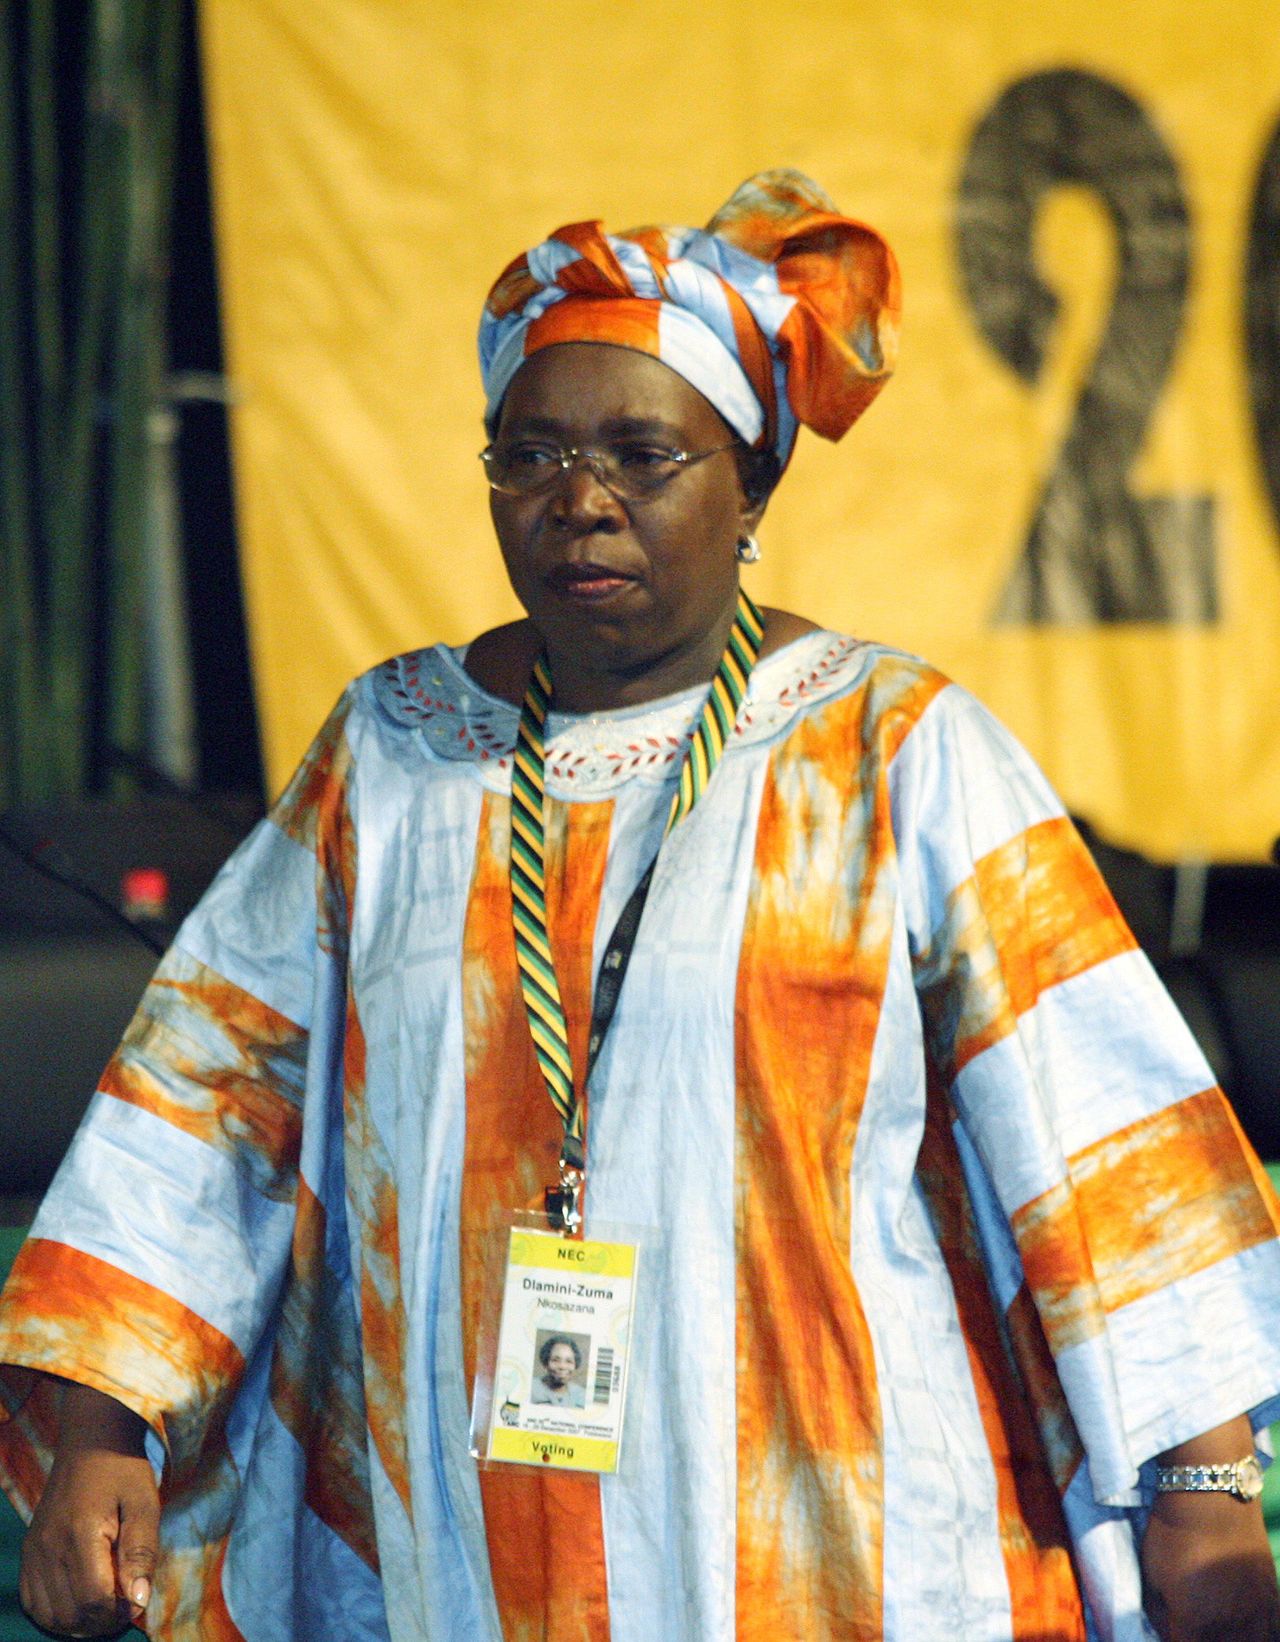 Nkosazana Dlamini-Zuma, who is on the verge of becoming the party's leader, was minister of foreign affairs during Polokwane in 2007 and candidate for secretary general on the Thabo Mbeki slate.